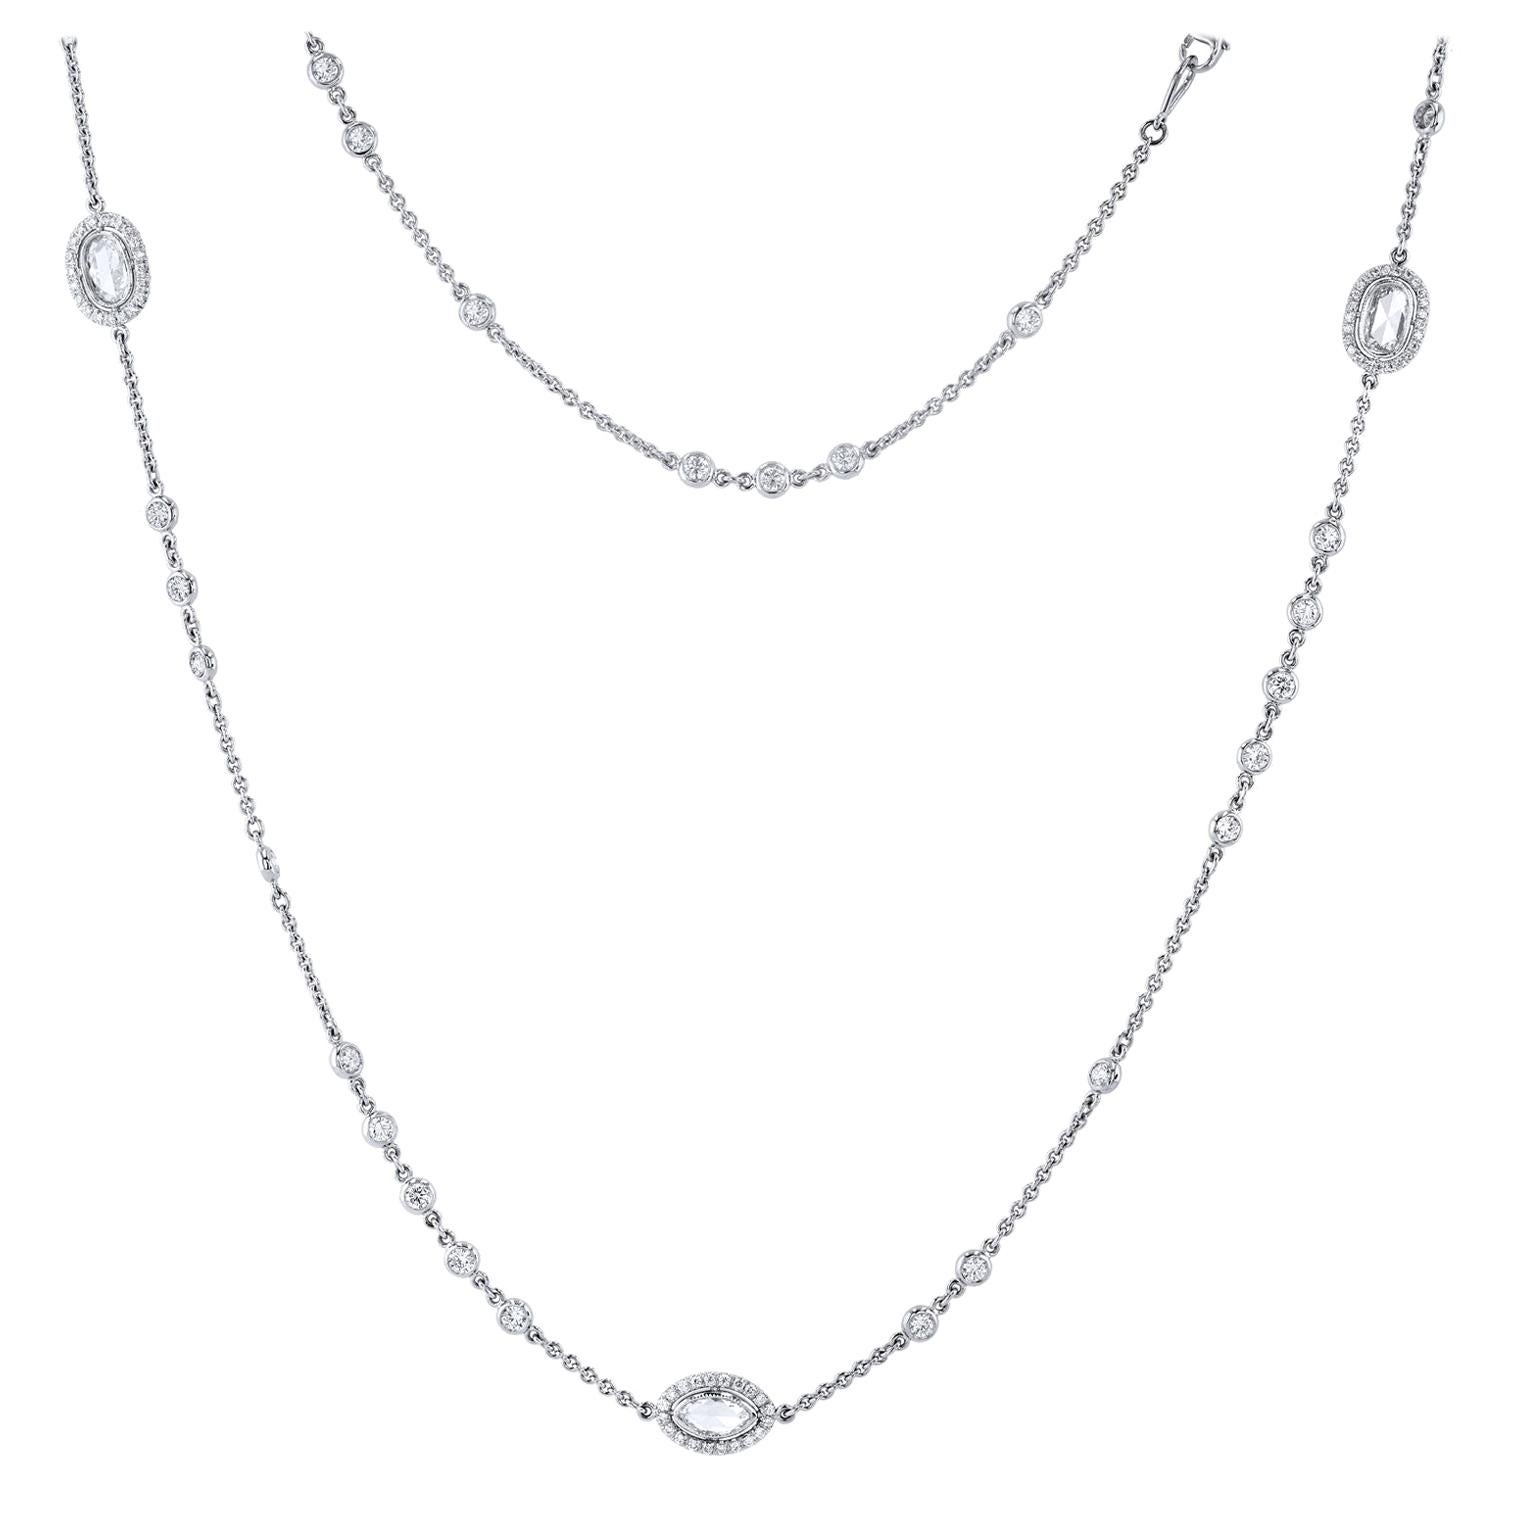 4.98 carats of Bezel set Diamonds by The Yard in 18 karat White Gold Necklace